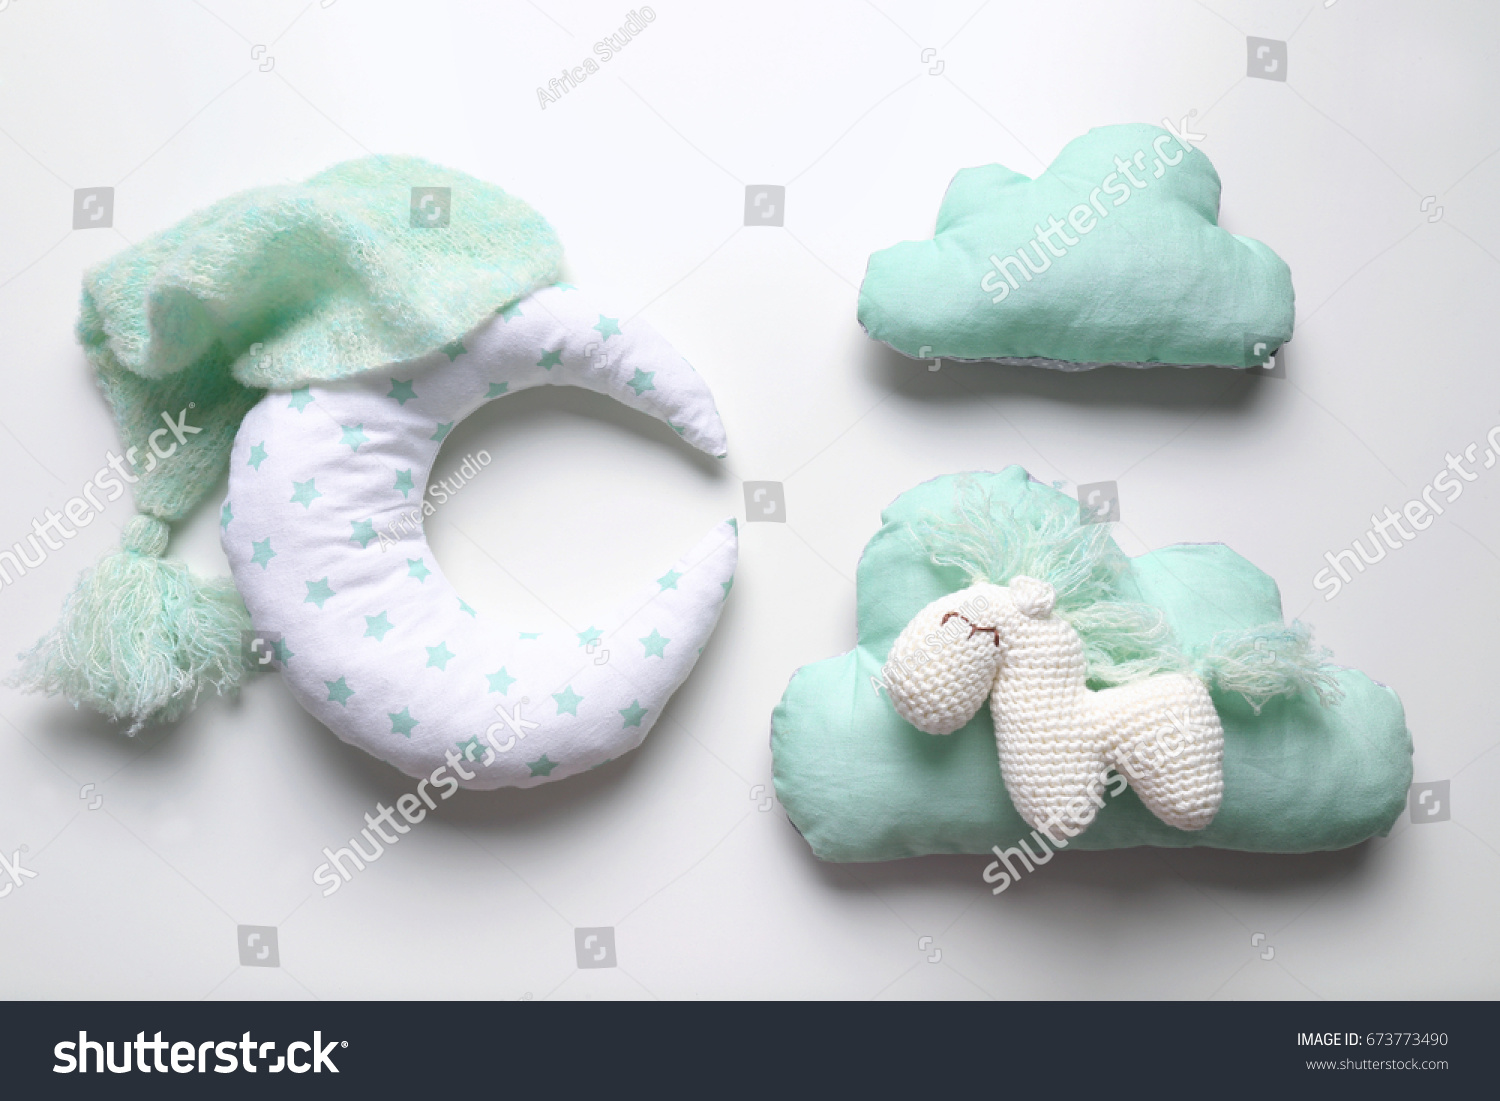 Adorable crochet toy with baby clothes and pillows isolated on white #673773490